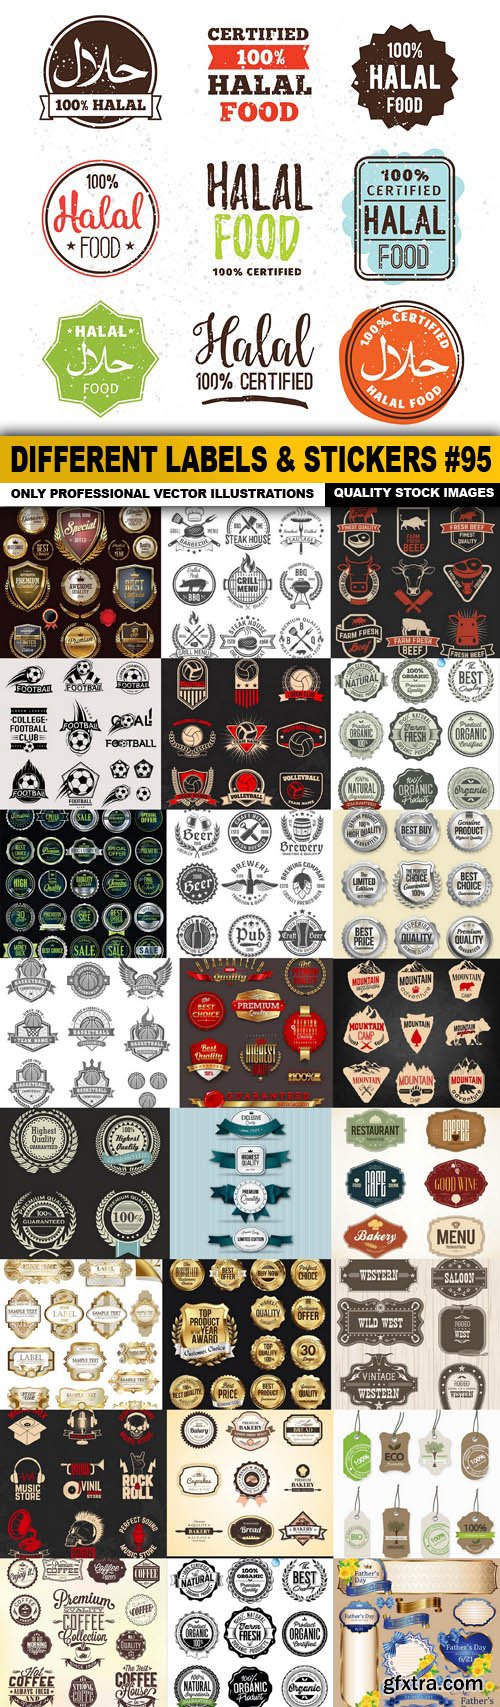 Different Labels & Stickers #95 - 25 Vector